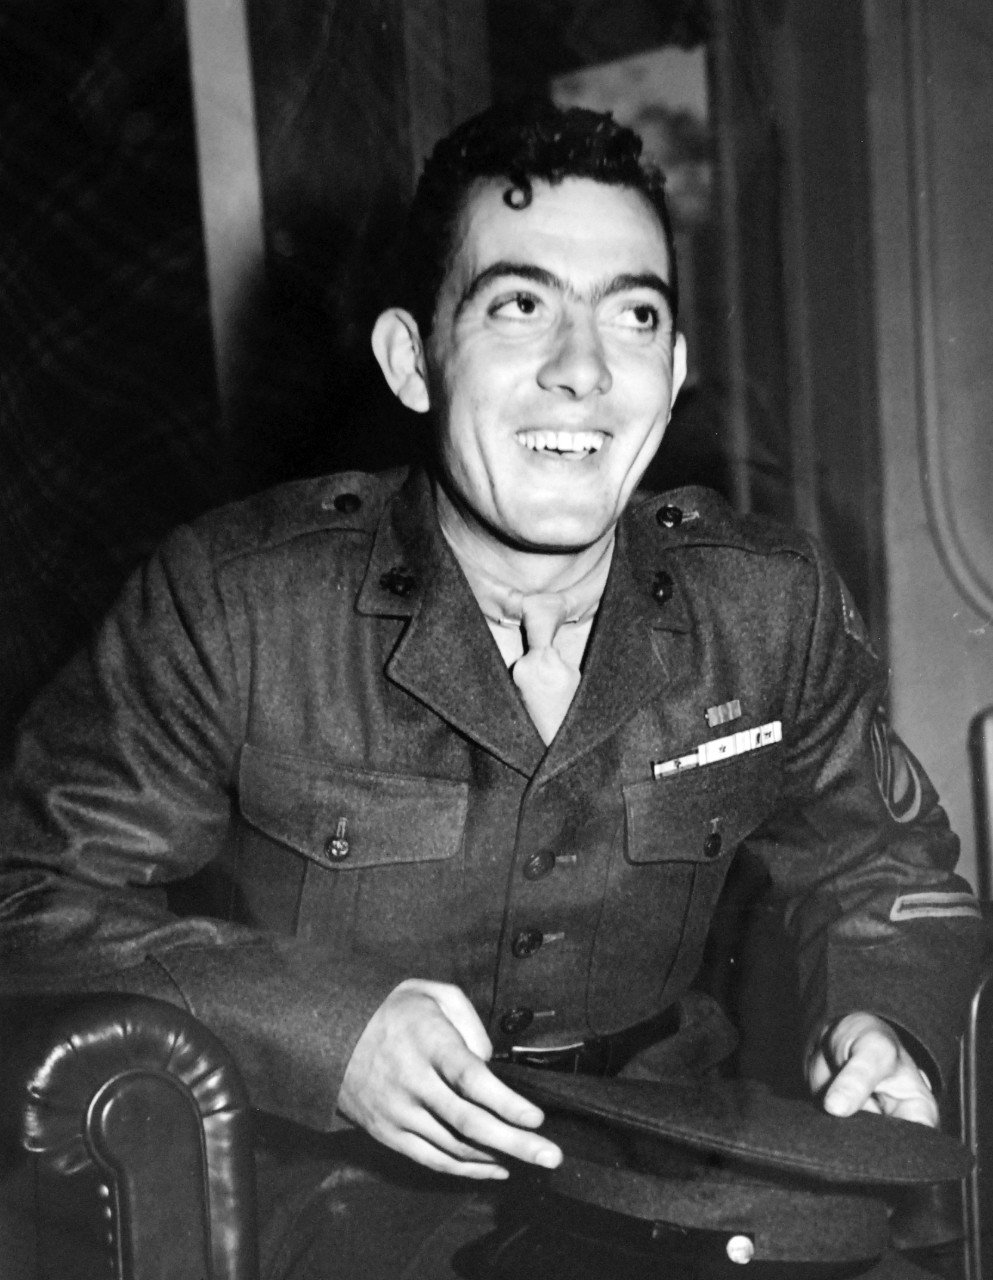 LC-Lot-801-35:  Guadalcanal Campaign, August 1942 – February 1943. Press Query About Hero’s Father Brings a Smile.   Platoon Sergeant John Basilone, USMC, broke out in this big smile in the pres room at the Navy Department, September 2, 1943, when in the course of an interview, a reporter asked about his Italian-born father.  Asked what his father thought of him serving in the Marines, Basilone smiled and answered simply, “My father likes this country.”  The Marine sergeant was awarded the Medal of Honor for his actions at Guadalcanal.   Basilone later died at the Battle for Iwo Jima, February 19, 1945, during that D-Day invasion.  U.S. Navy Photograph.    Photographed through Mylar sleeve. Courtesy of the Library of Congress.  (2015/11/06).